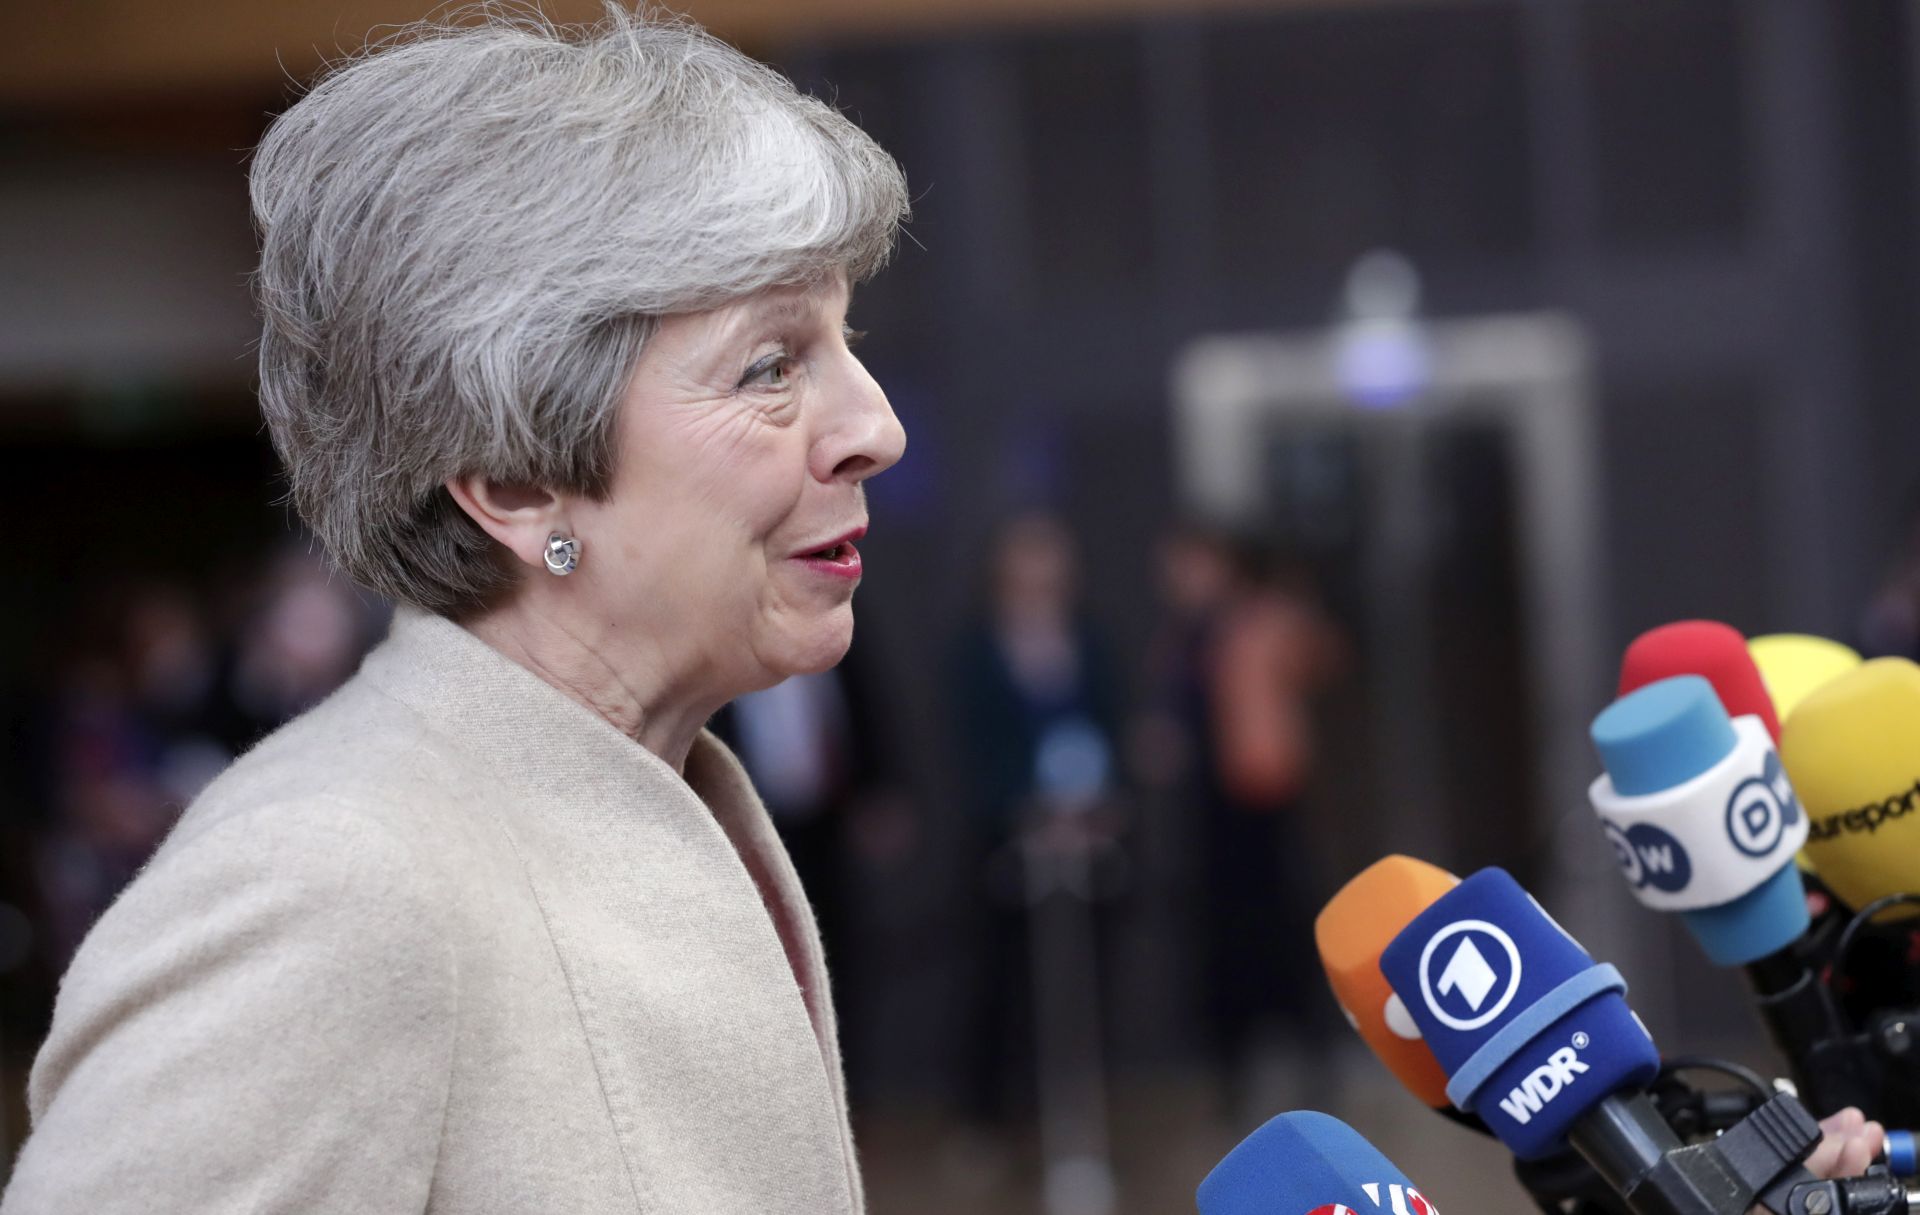 epa07608365 British Prime Minister Theresa May arrives at a special EU summit in Brussels, Belgium, 28 May 2019. Two days after the European Parliament elections, EU heads of state or government will gather for a summit to discuss the outcome of the vote and start the nomination process for the heads of the EU institutions.  EPA/STEPHANIE LECOCQ